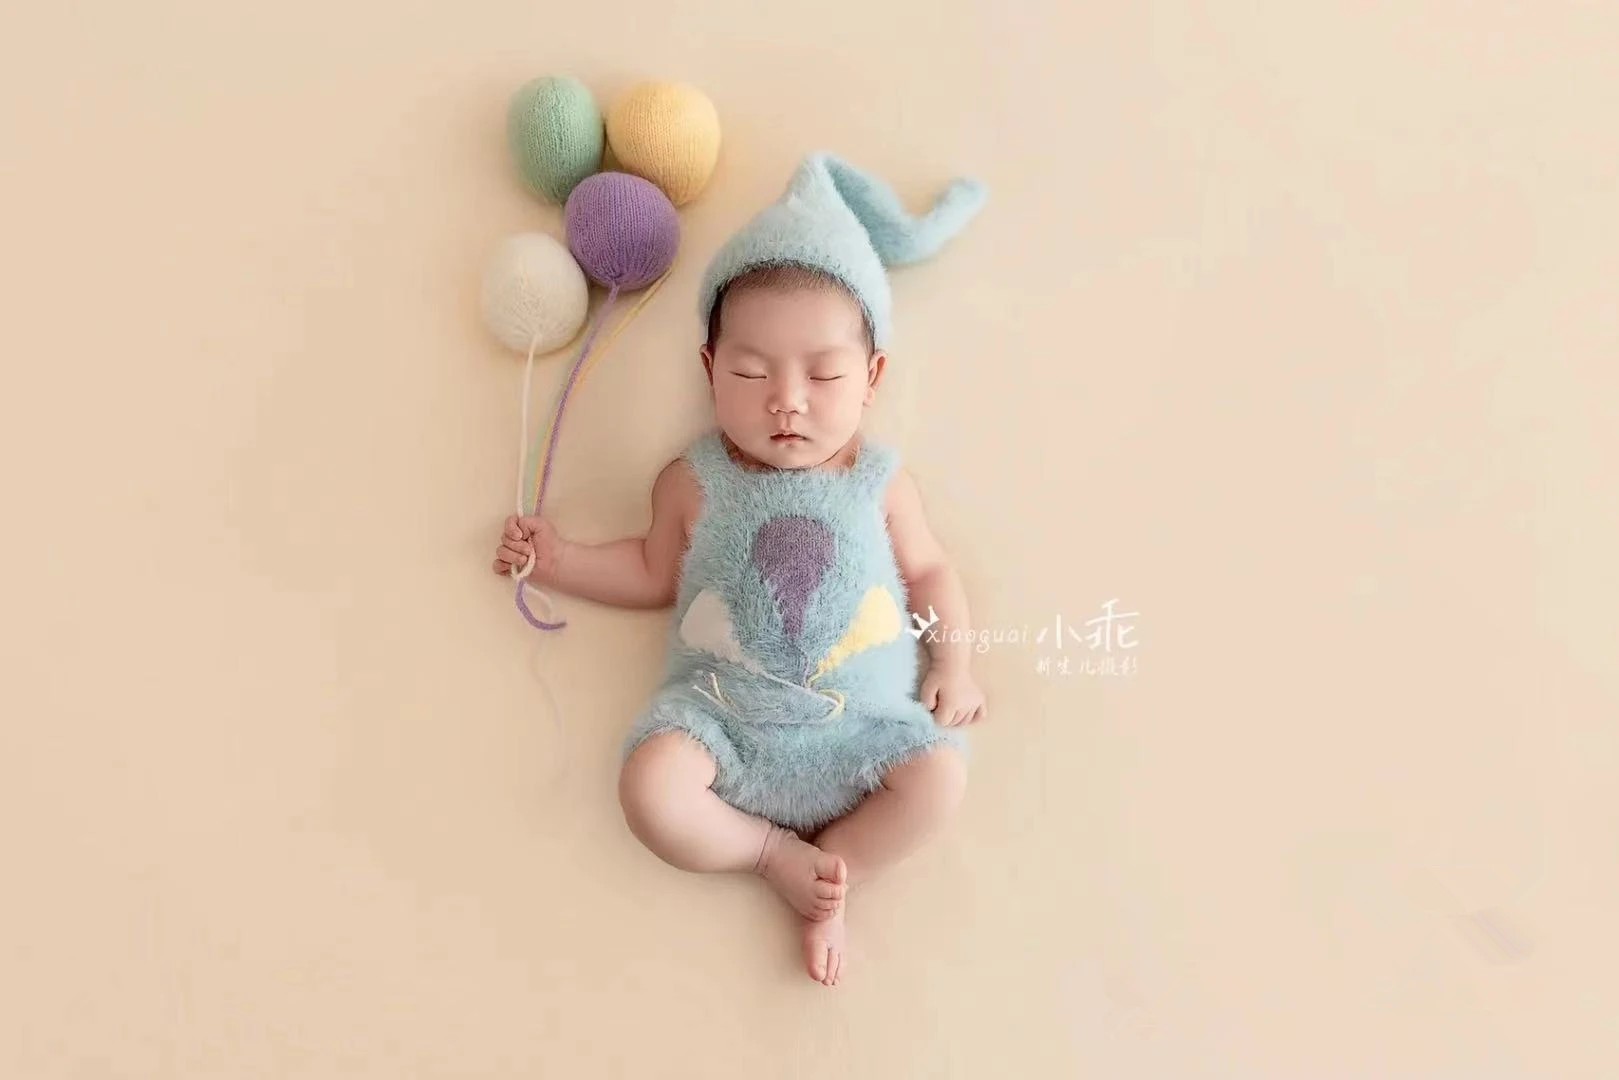 Dvotinst Newborn Baby Photography Props Knitting Balloon Outfits Hat Colorful Balloons Set Creative Studio Shooting Photo Props enlarge